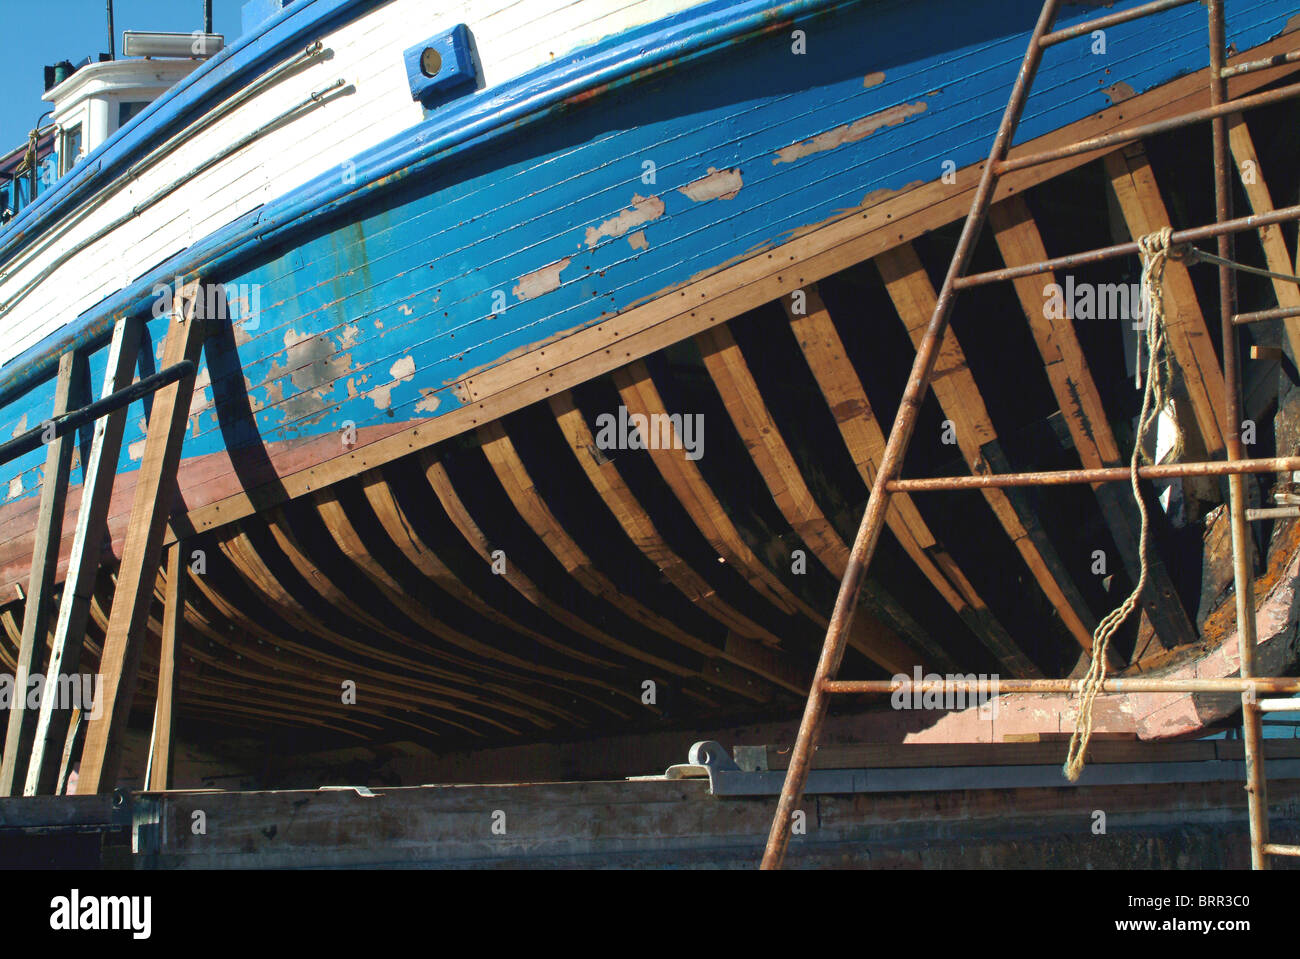 Wooden sailing boat in dry dock being repaired Stock Photo